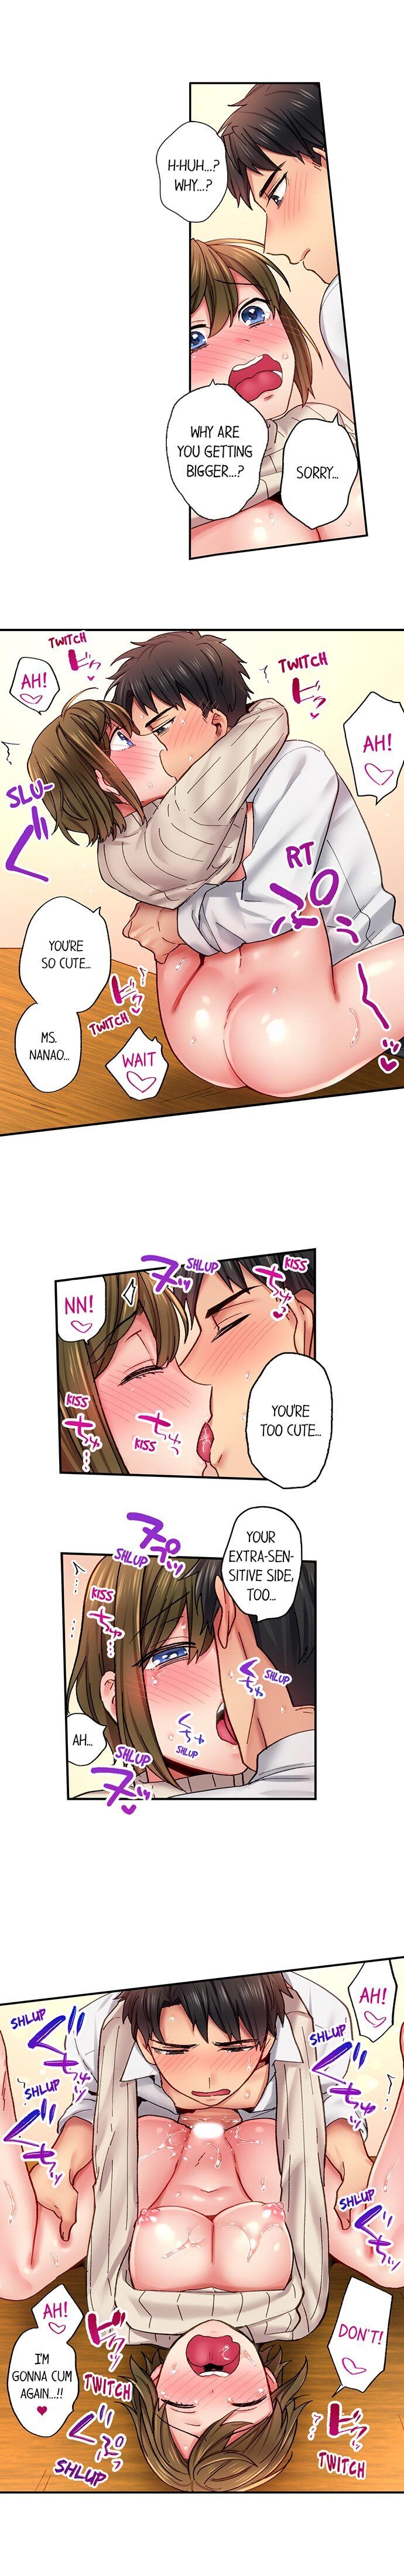 From Poker Face to Cumming Face in 90 Seconds - Chapter 15 Page 6